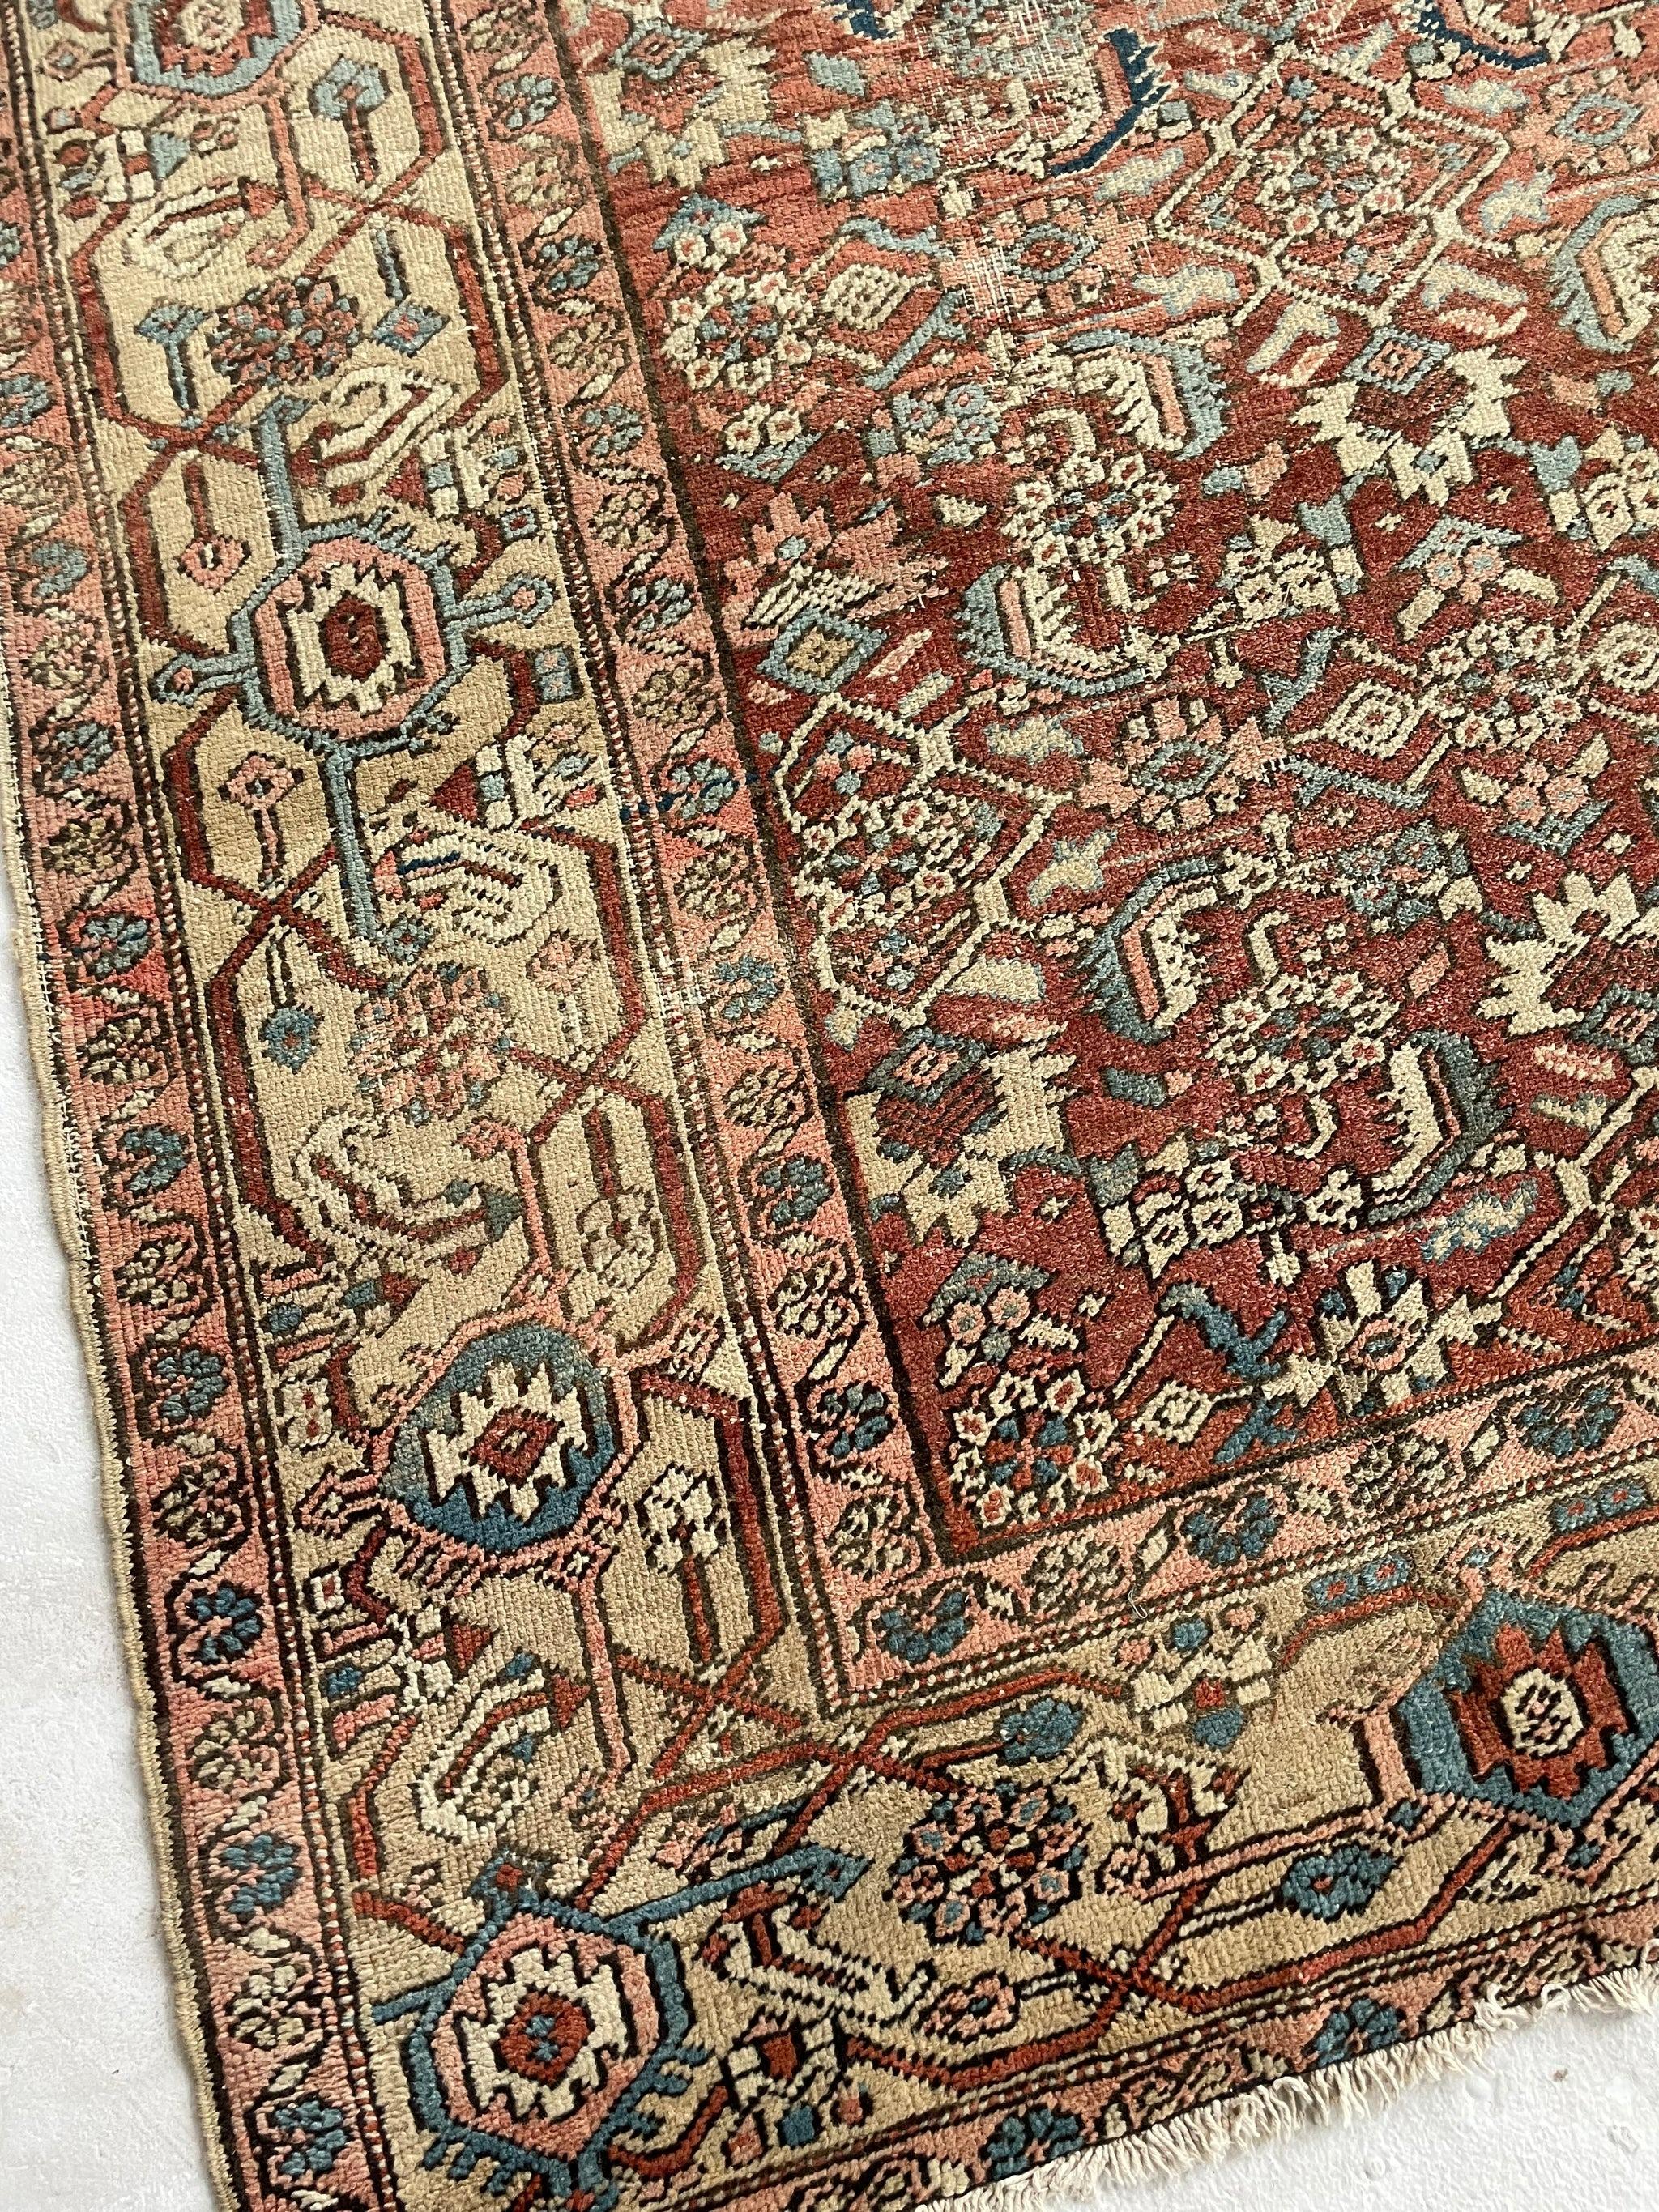 Truly Amazing Antique Rug with Iconic Design, circa 1920's In Good Condition For Sale In Milwaukee, WI